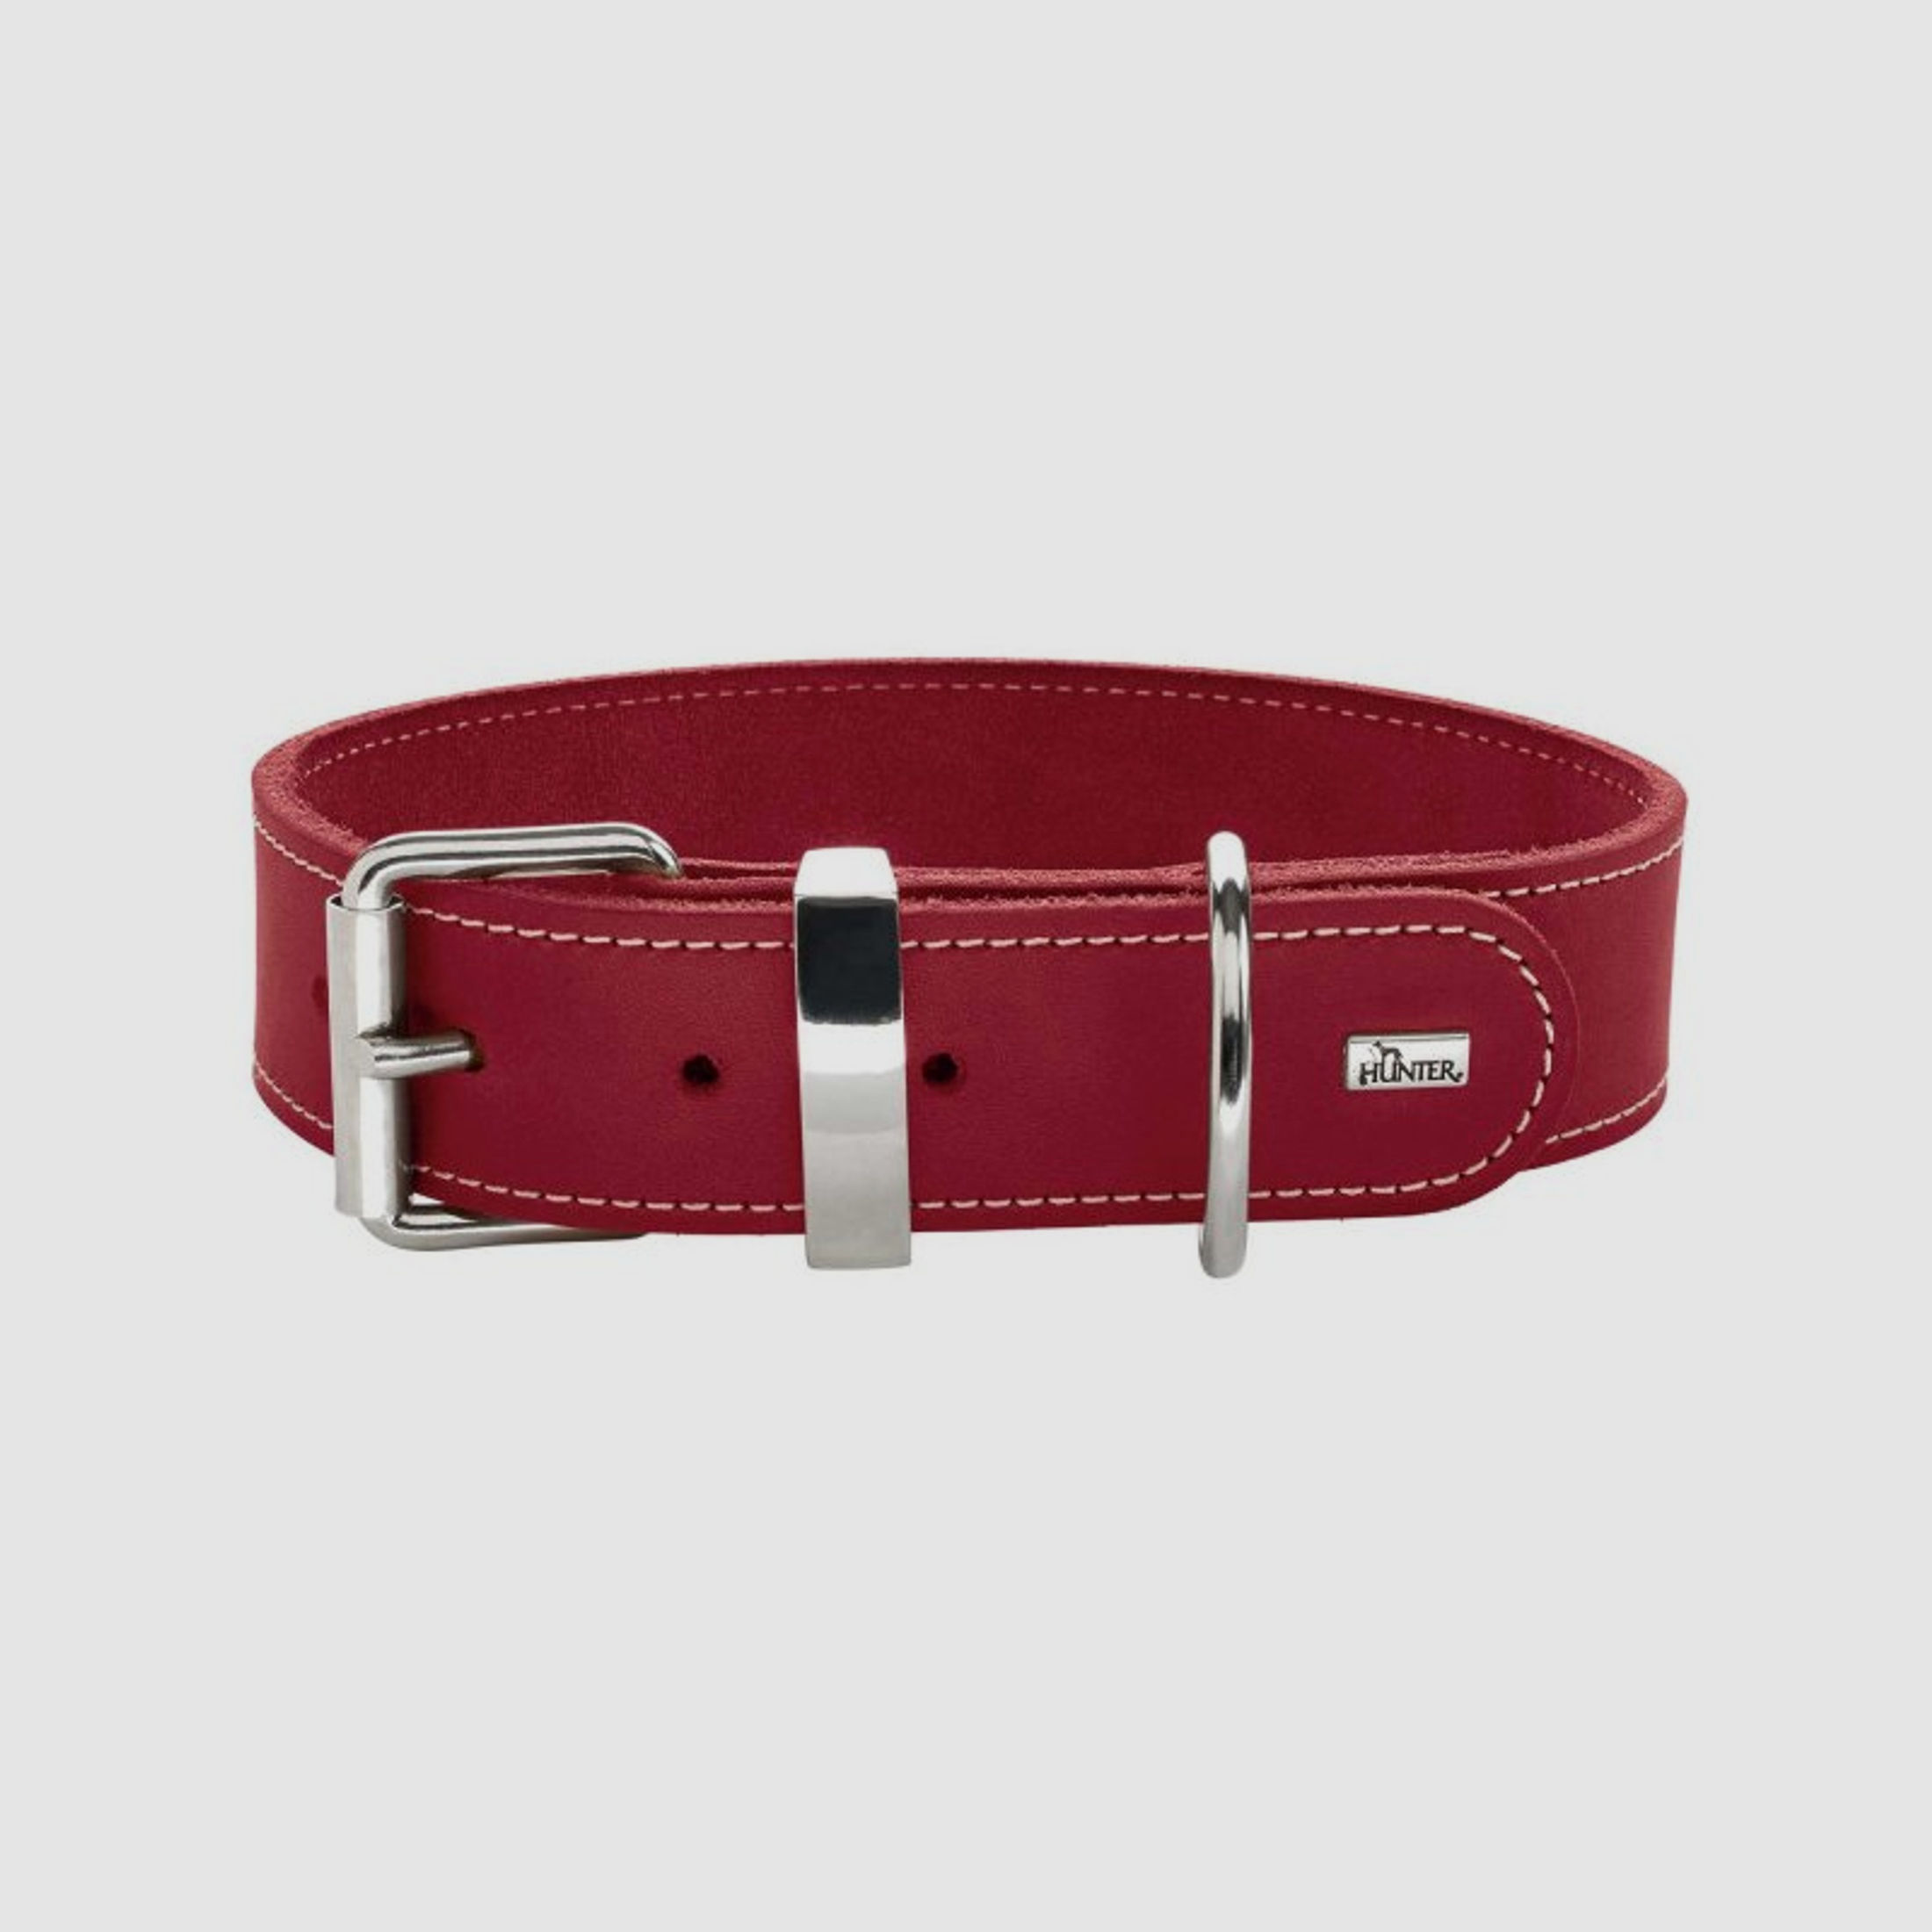 Hunter Halsband Aalborg Special Rot 45 cm/S